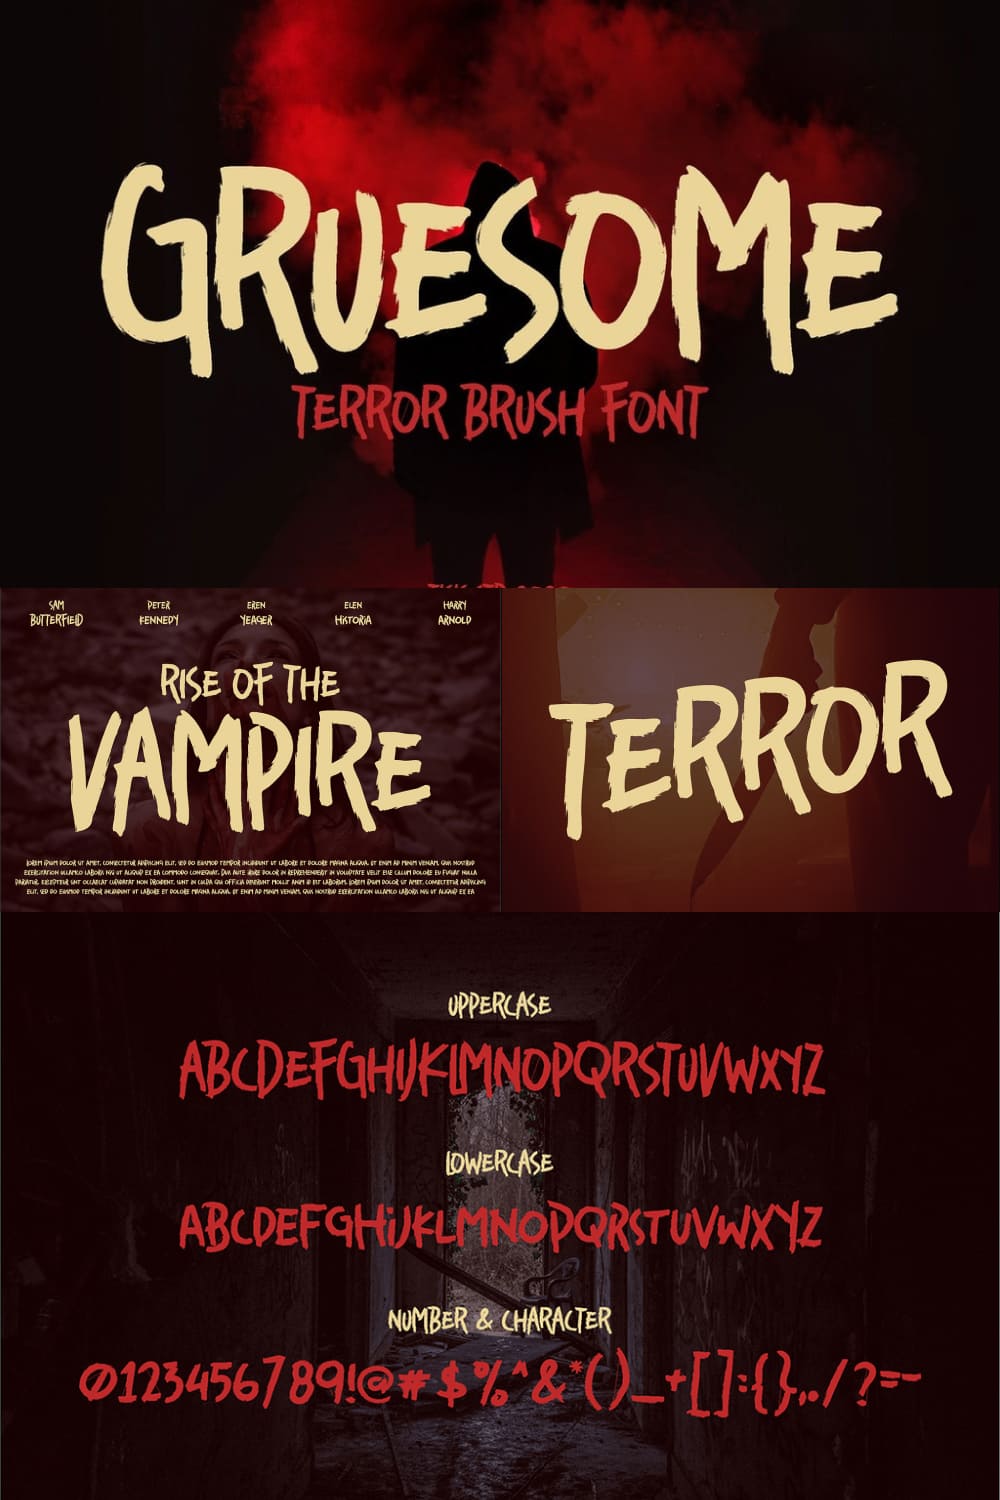 A bit scary font with Halloween overtones and style.